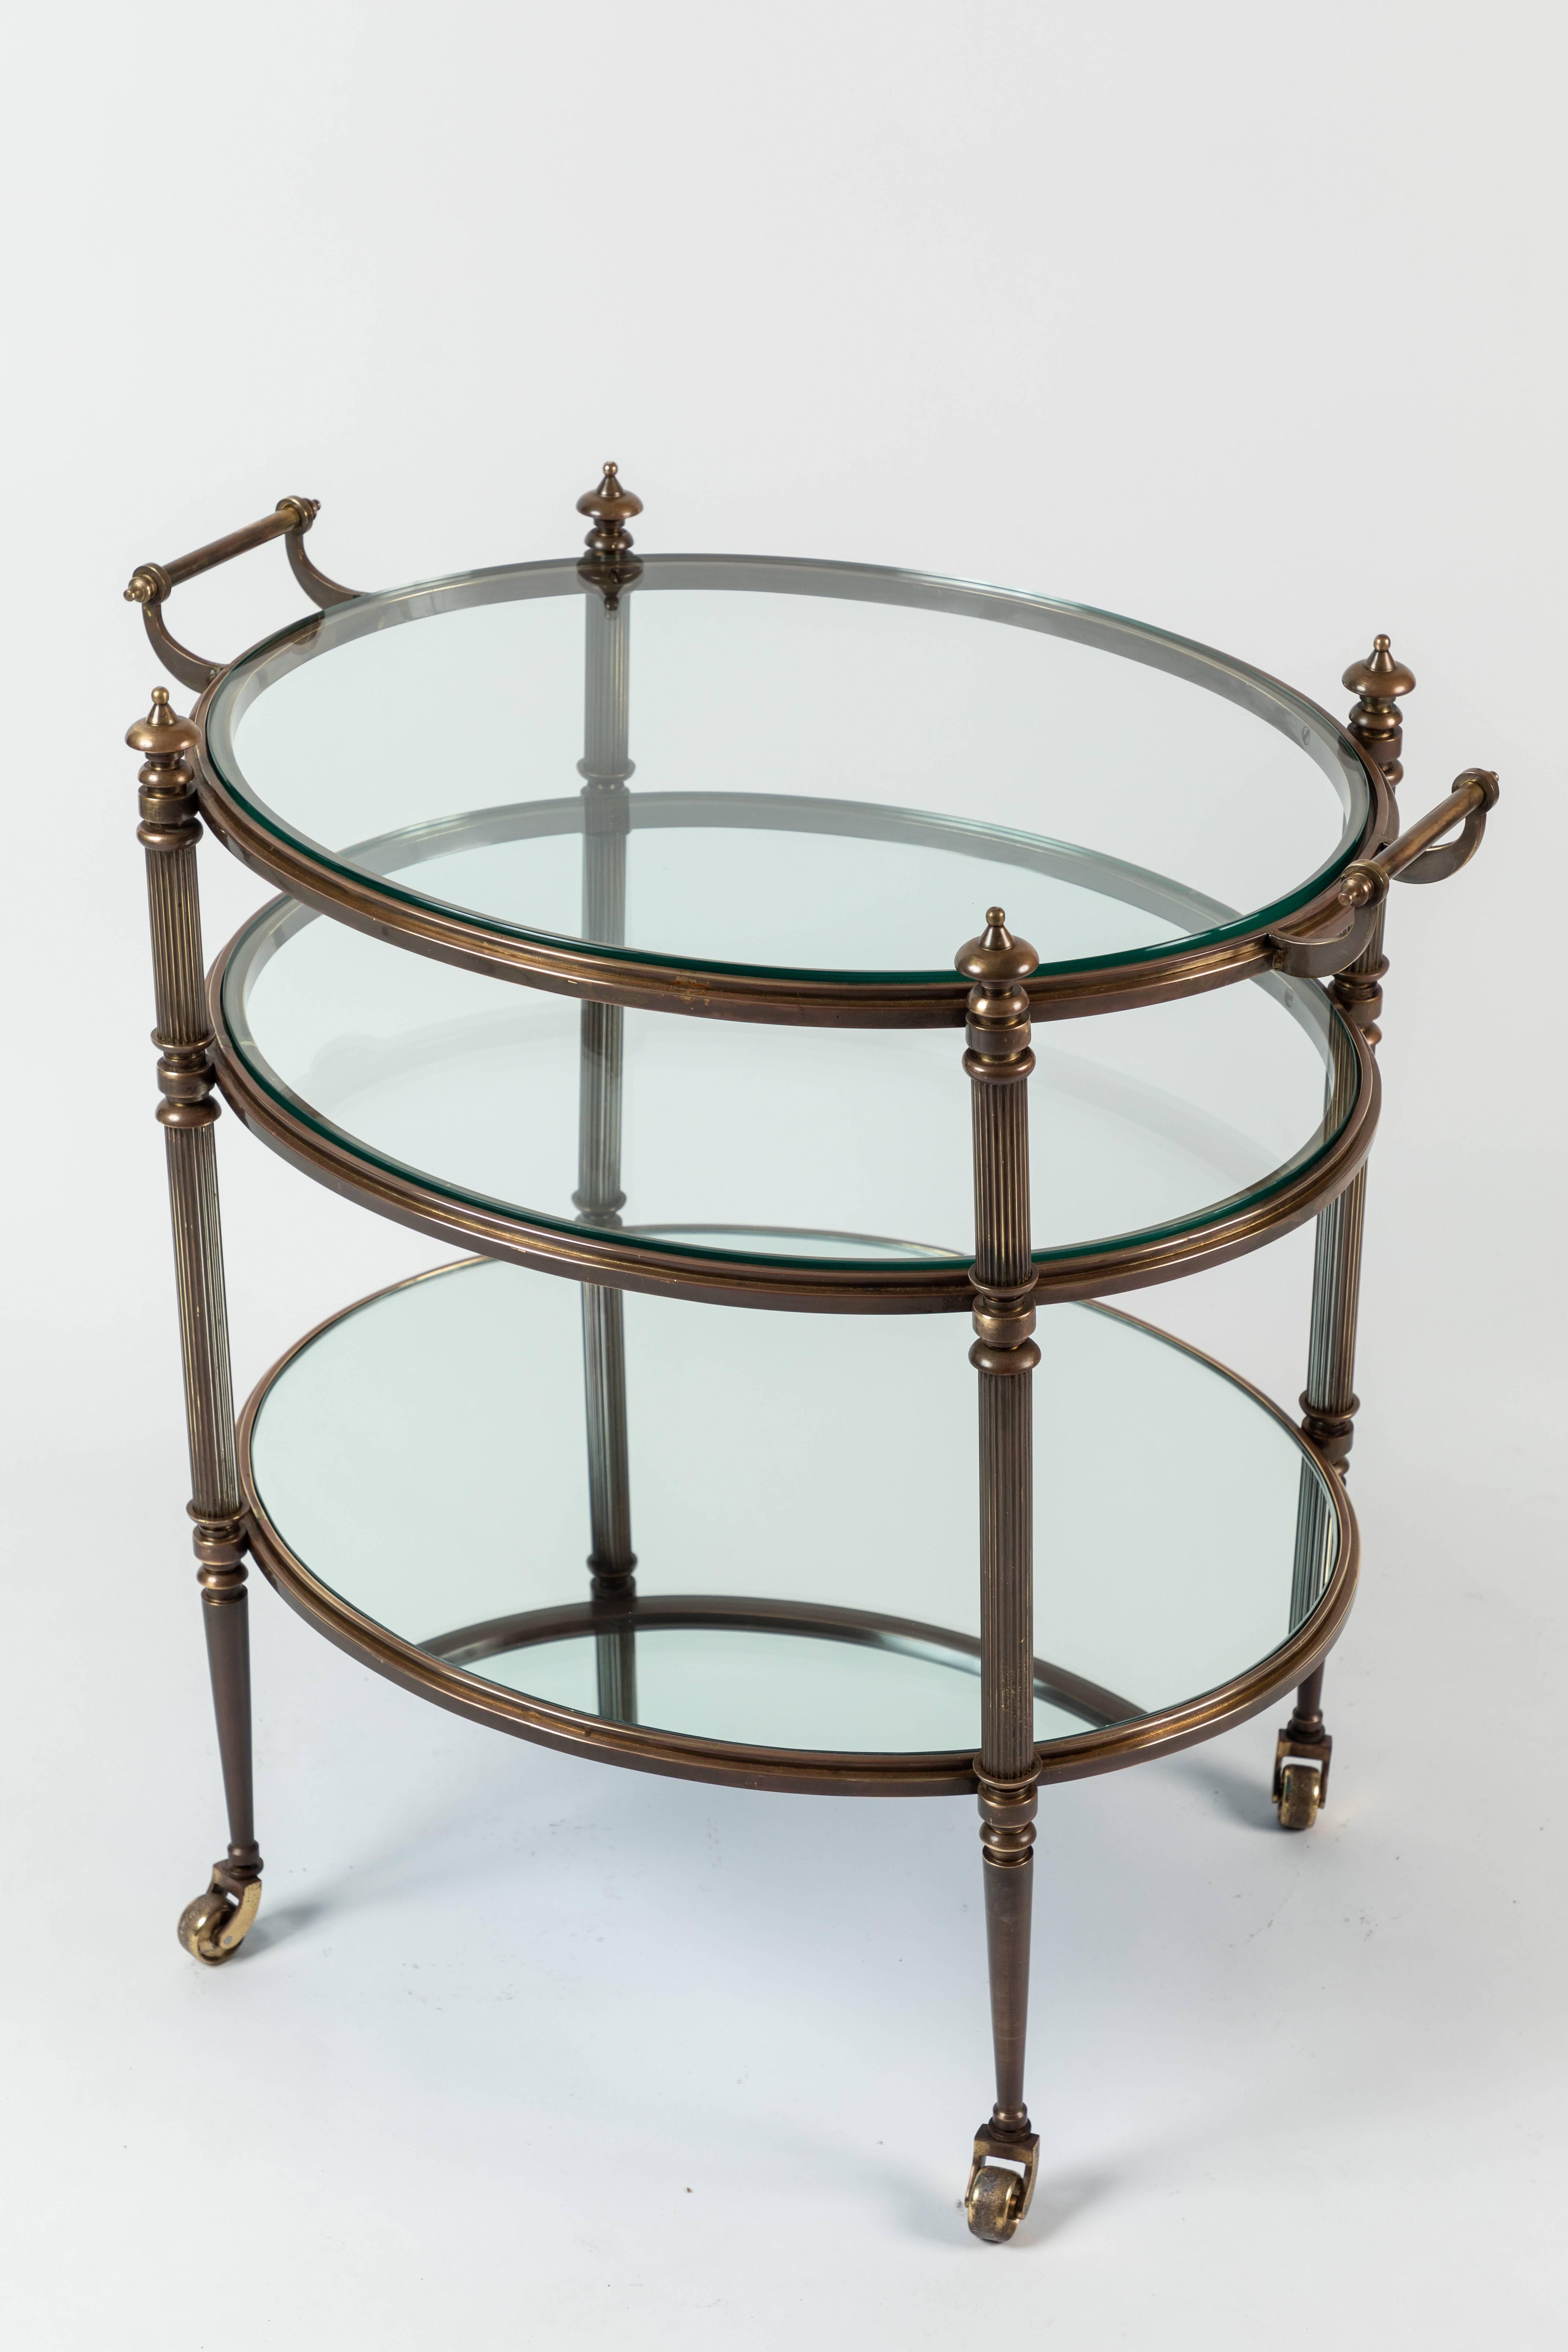 American Classical Three-Tier Brass and Glass Drinks Trolley